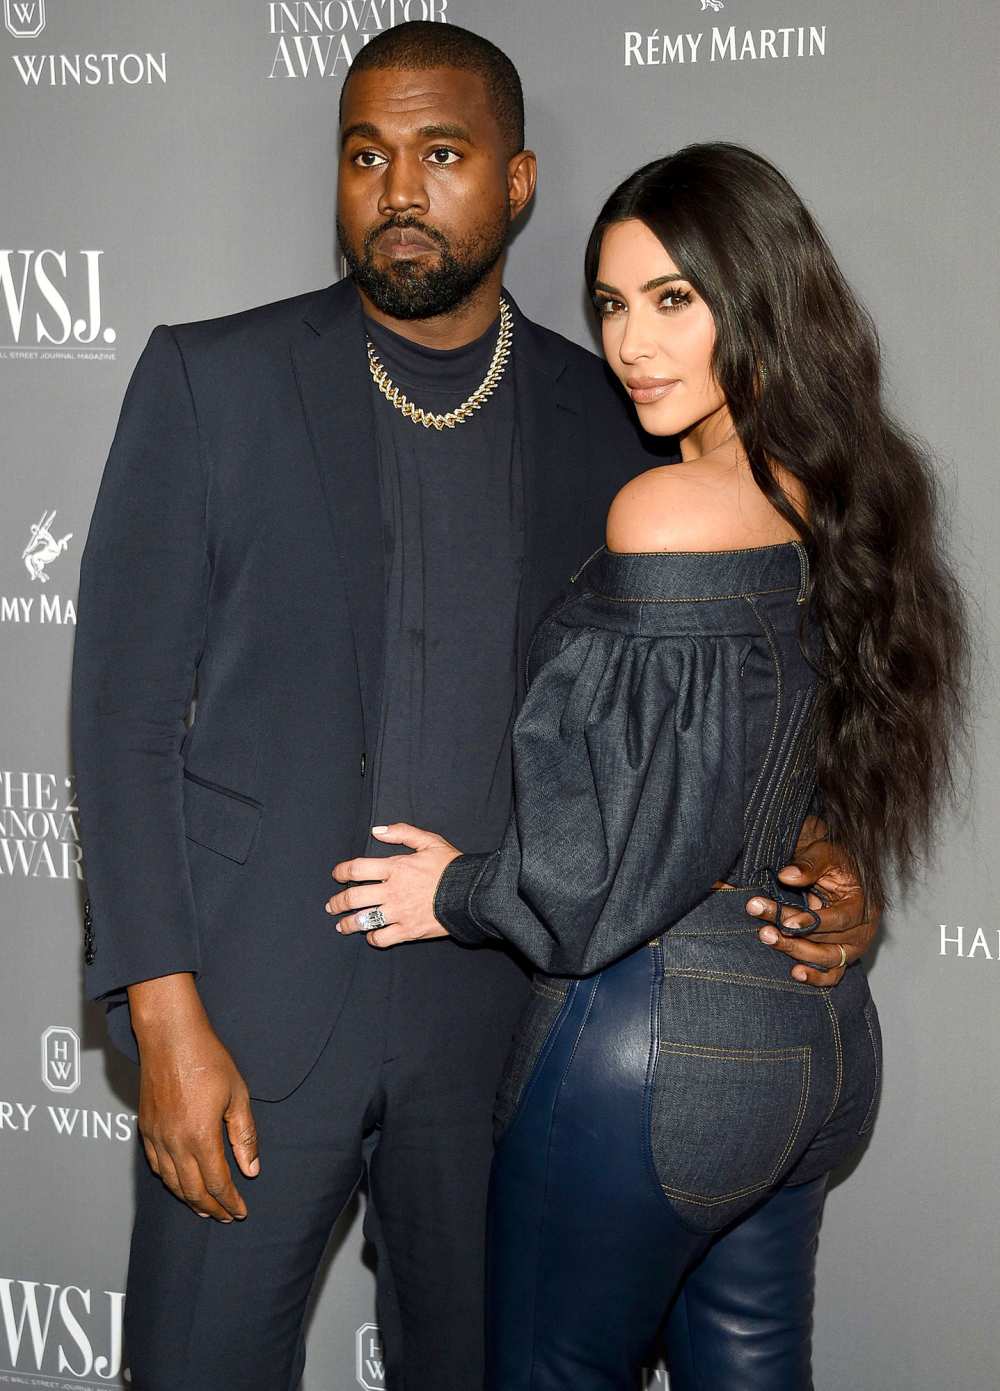 Kanye West Less Than Thrilled Marital Problems With Kim Kardashian Being Featured KUWTK